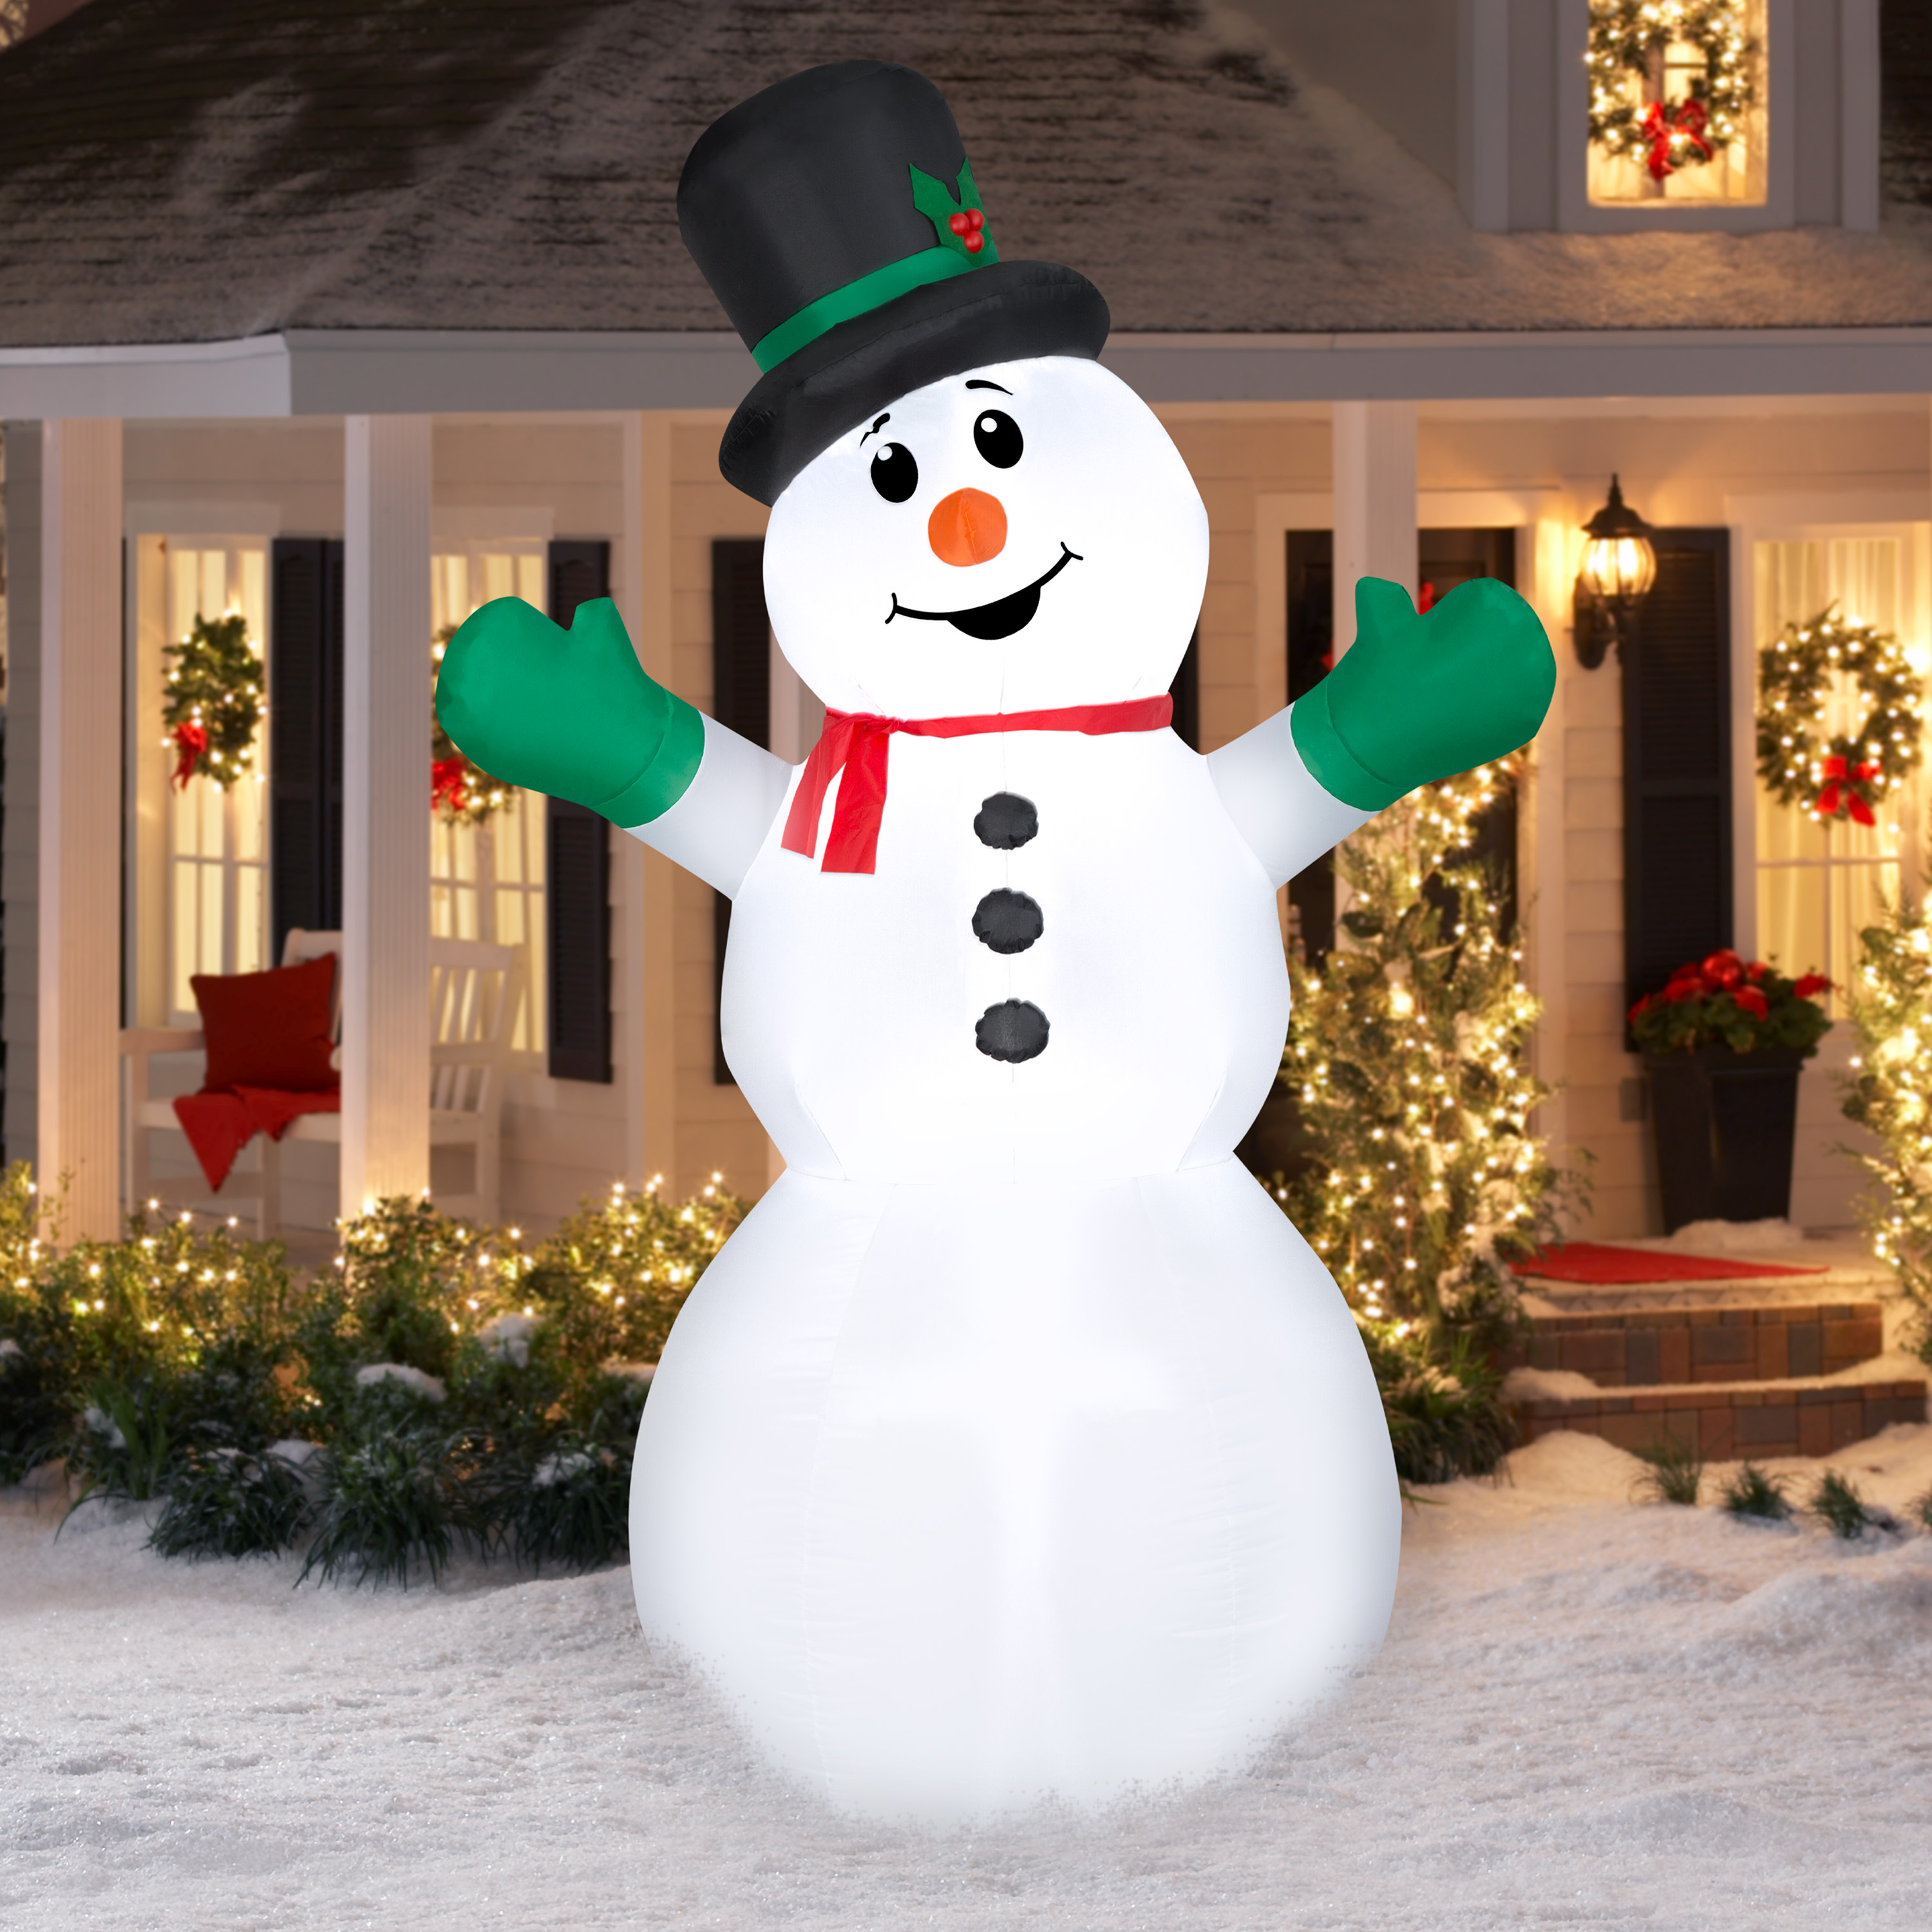 Airblown Inflatables Large Snowman, 9 Feet Tall - image 5 of 6